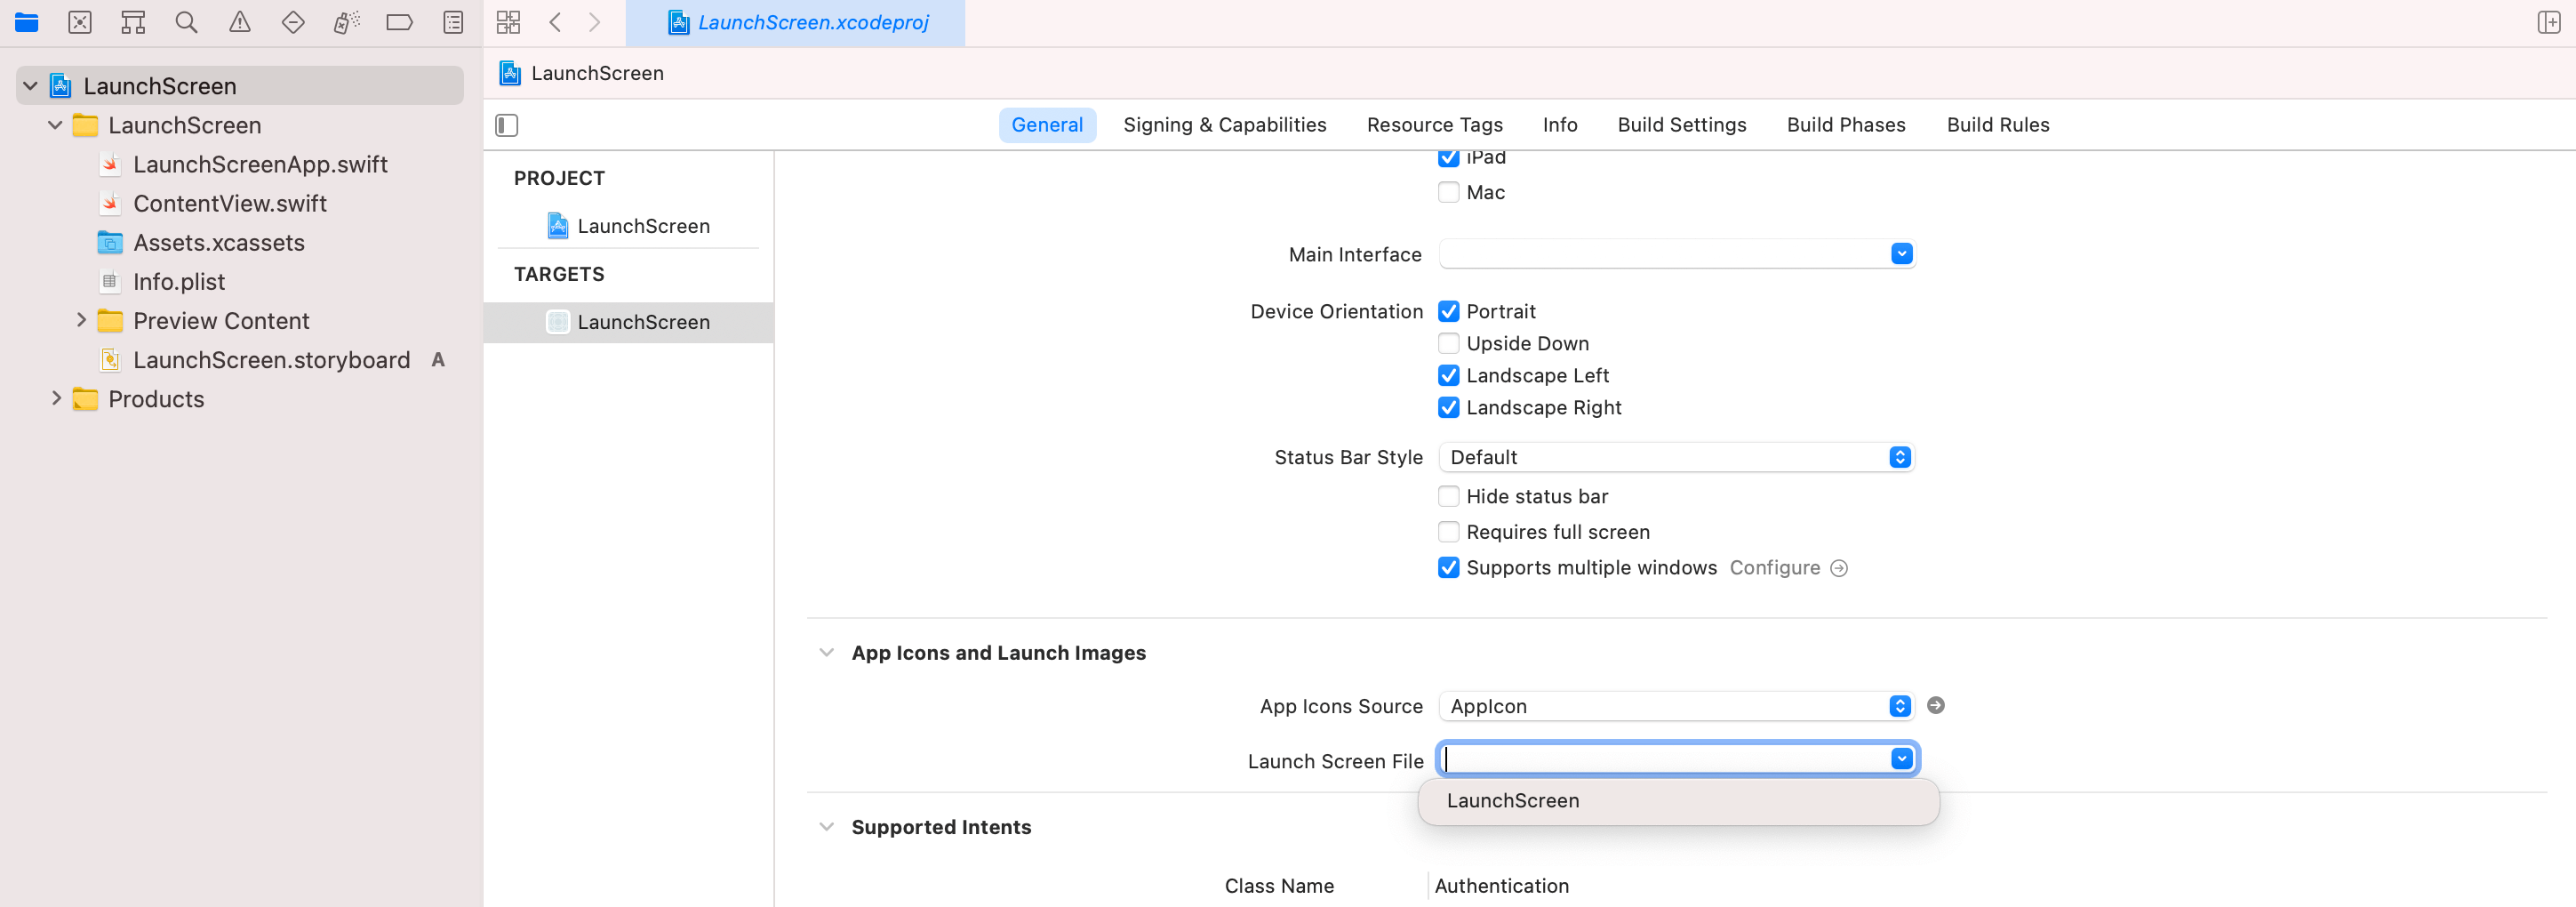 Launch Screen - Setting the project option